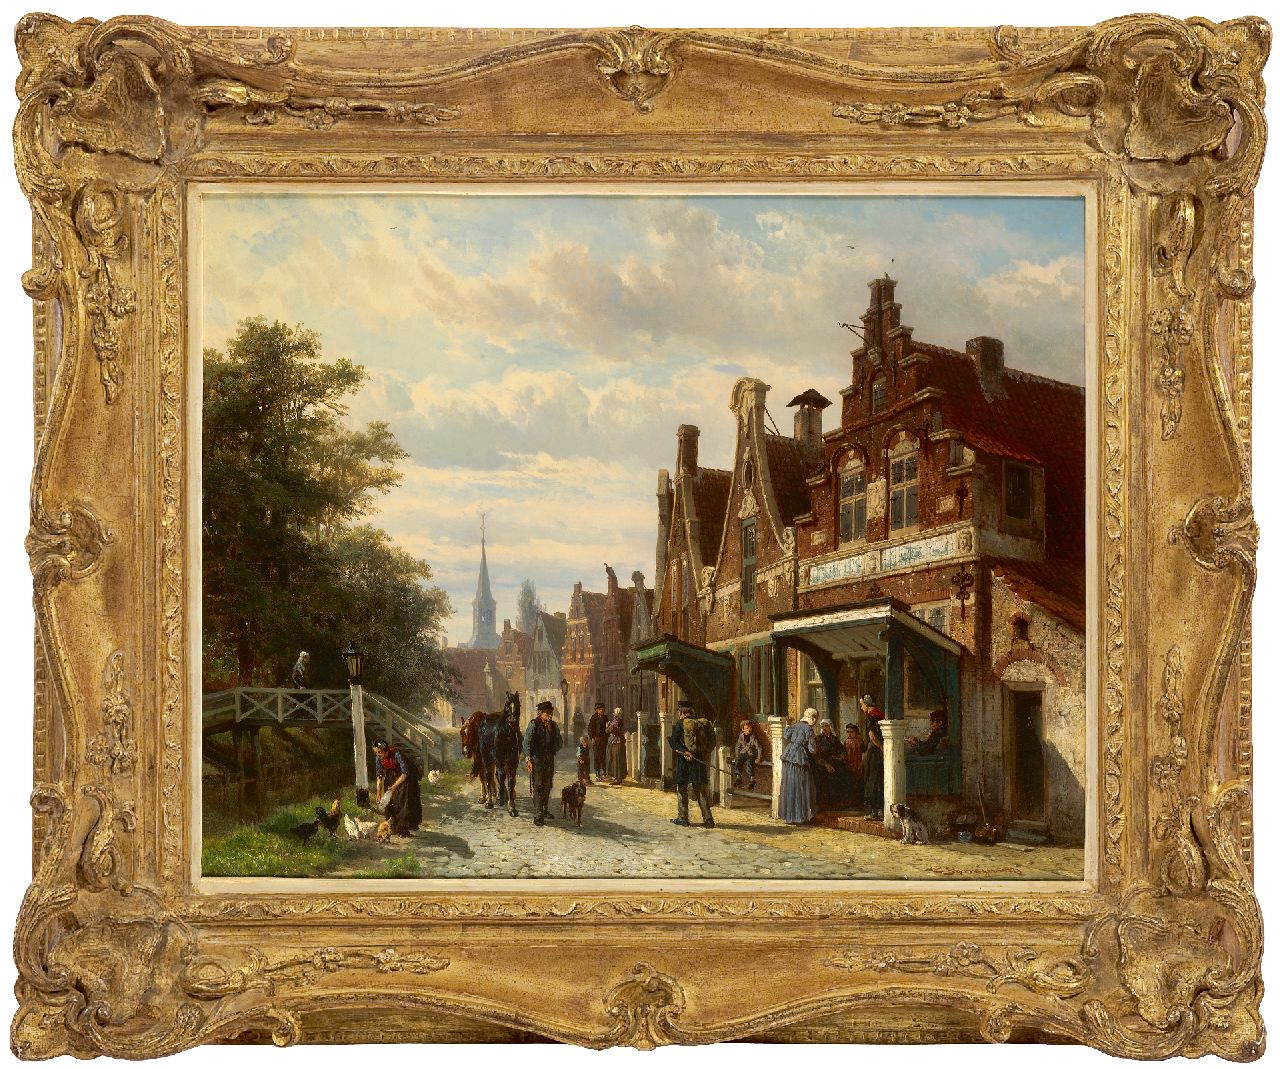 Springer C.  | Cornelis Springer | Paintings offered for sale | A town view in Makkum, Friesland, oil on panel 44.8 x 57.3 cm, signed l.r. and dated 1871